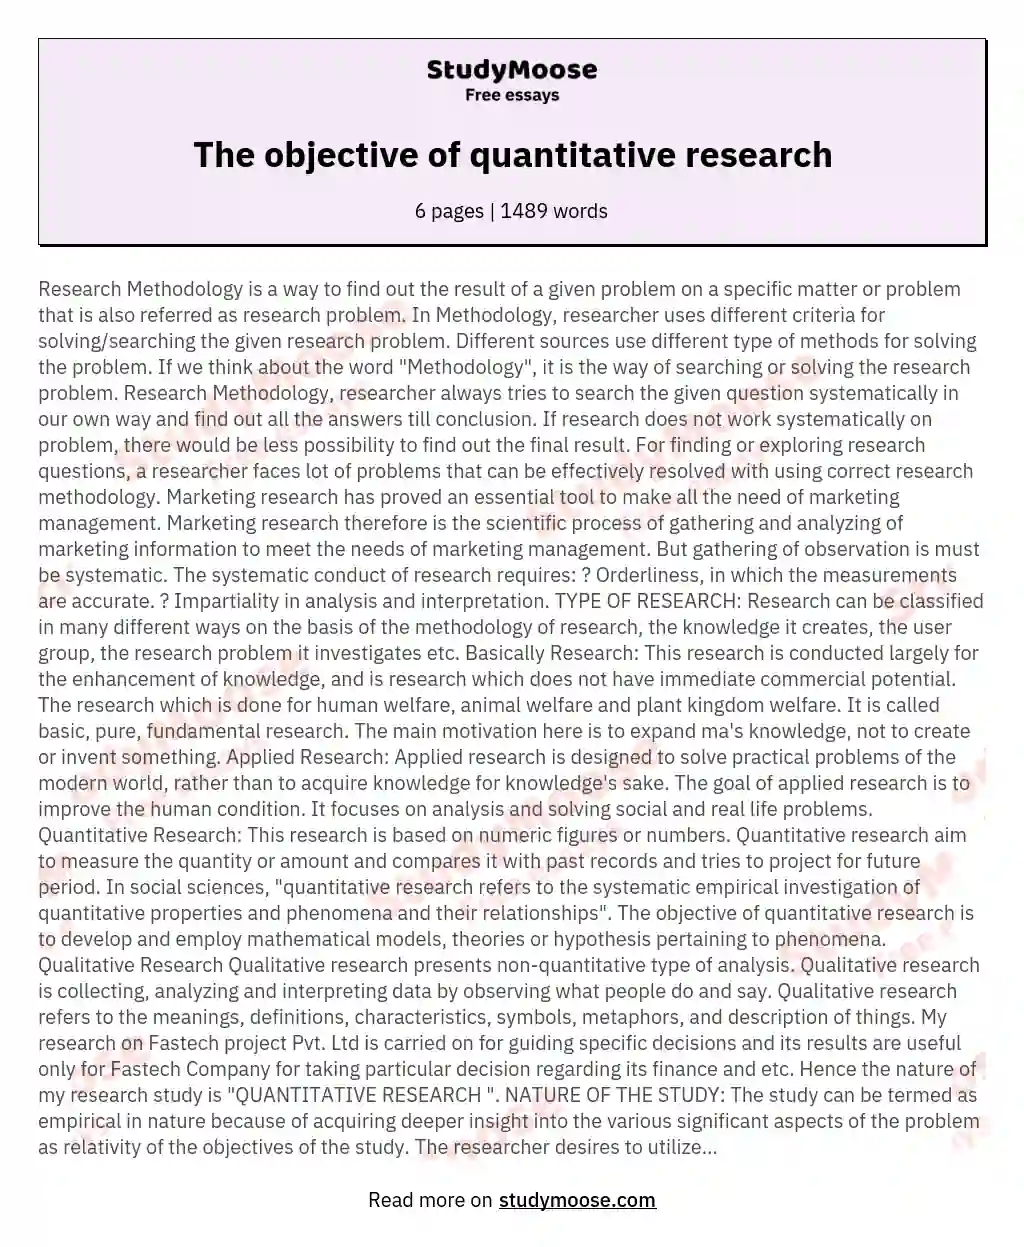 how to write research objectives for quantitative research